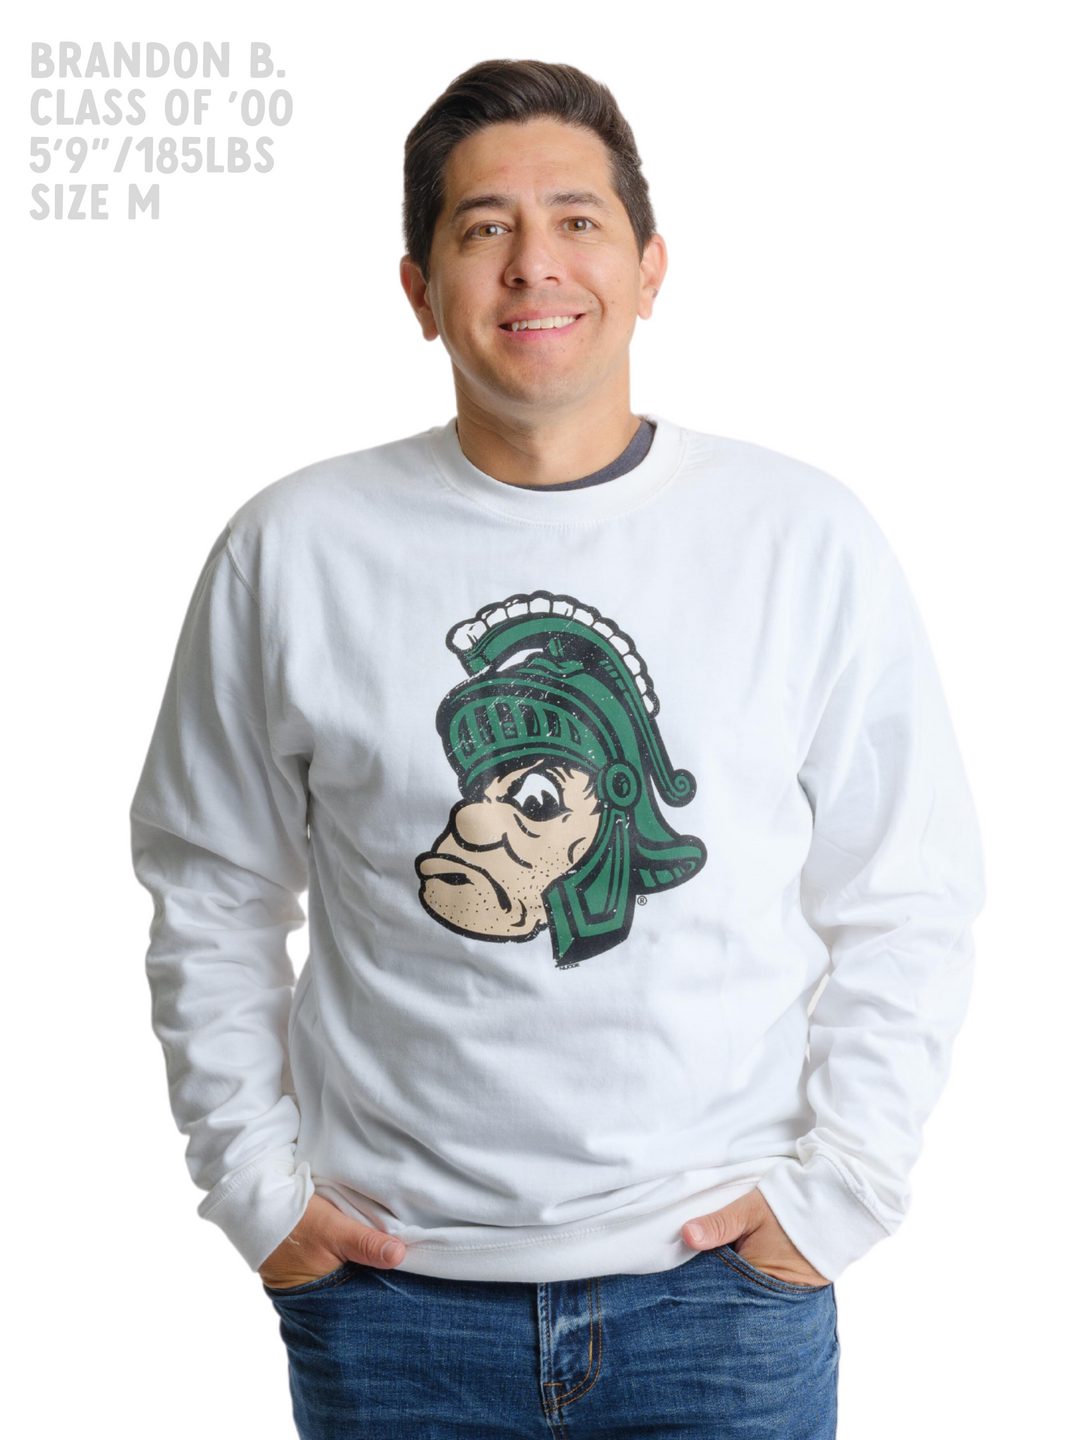 Vintage Michigan State Full Color Gruff Sparty White Crewneck Sweatshirt Pullover